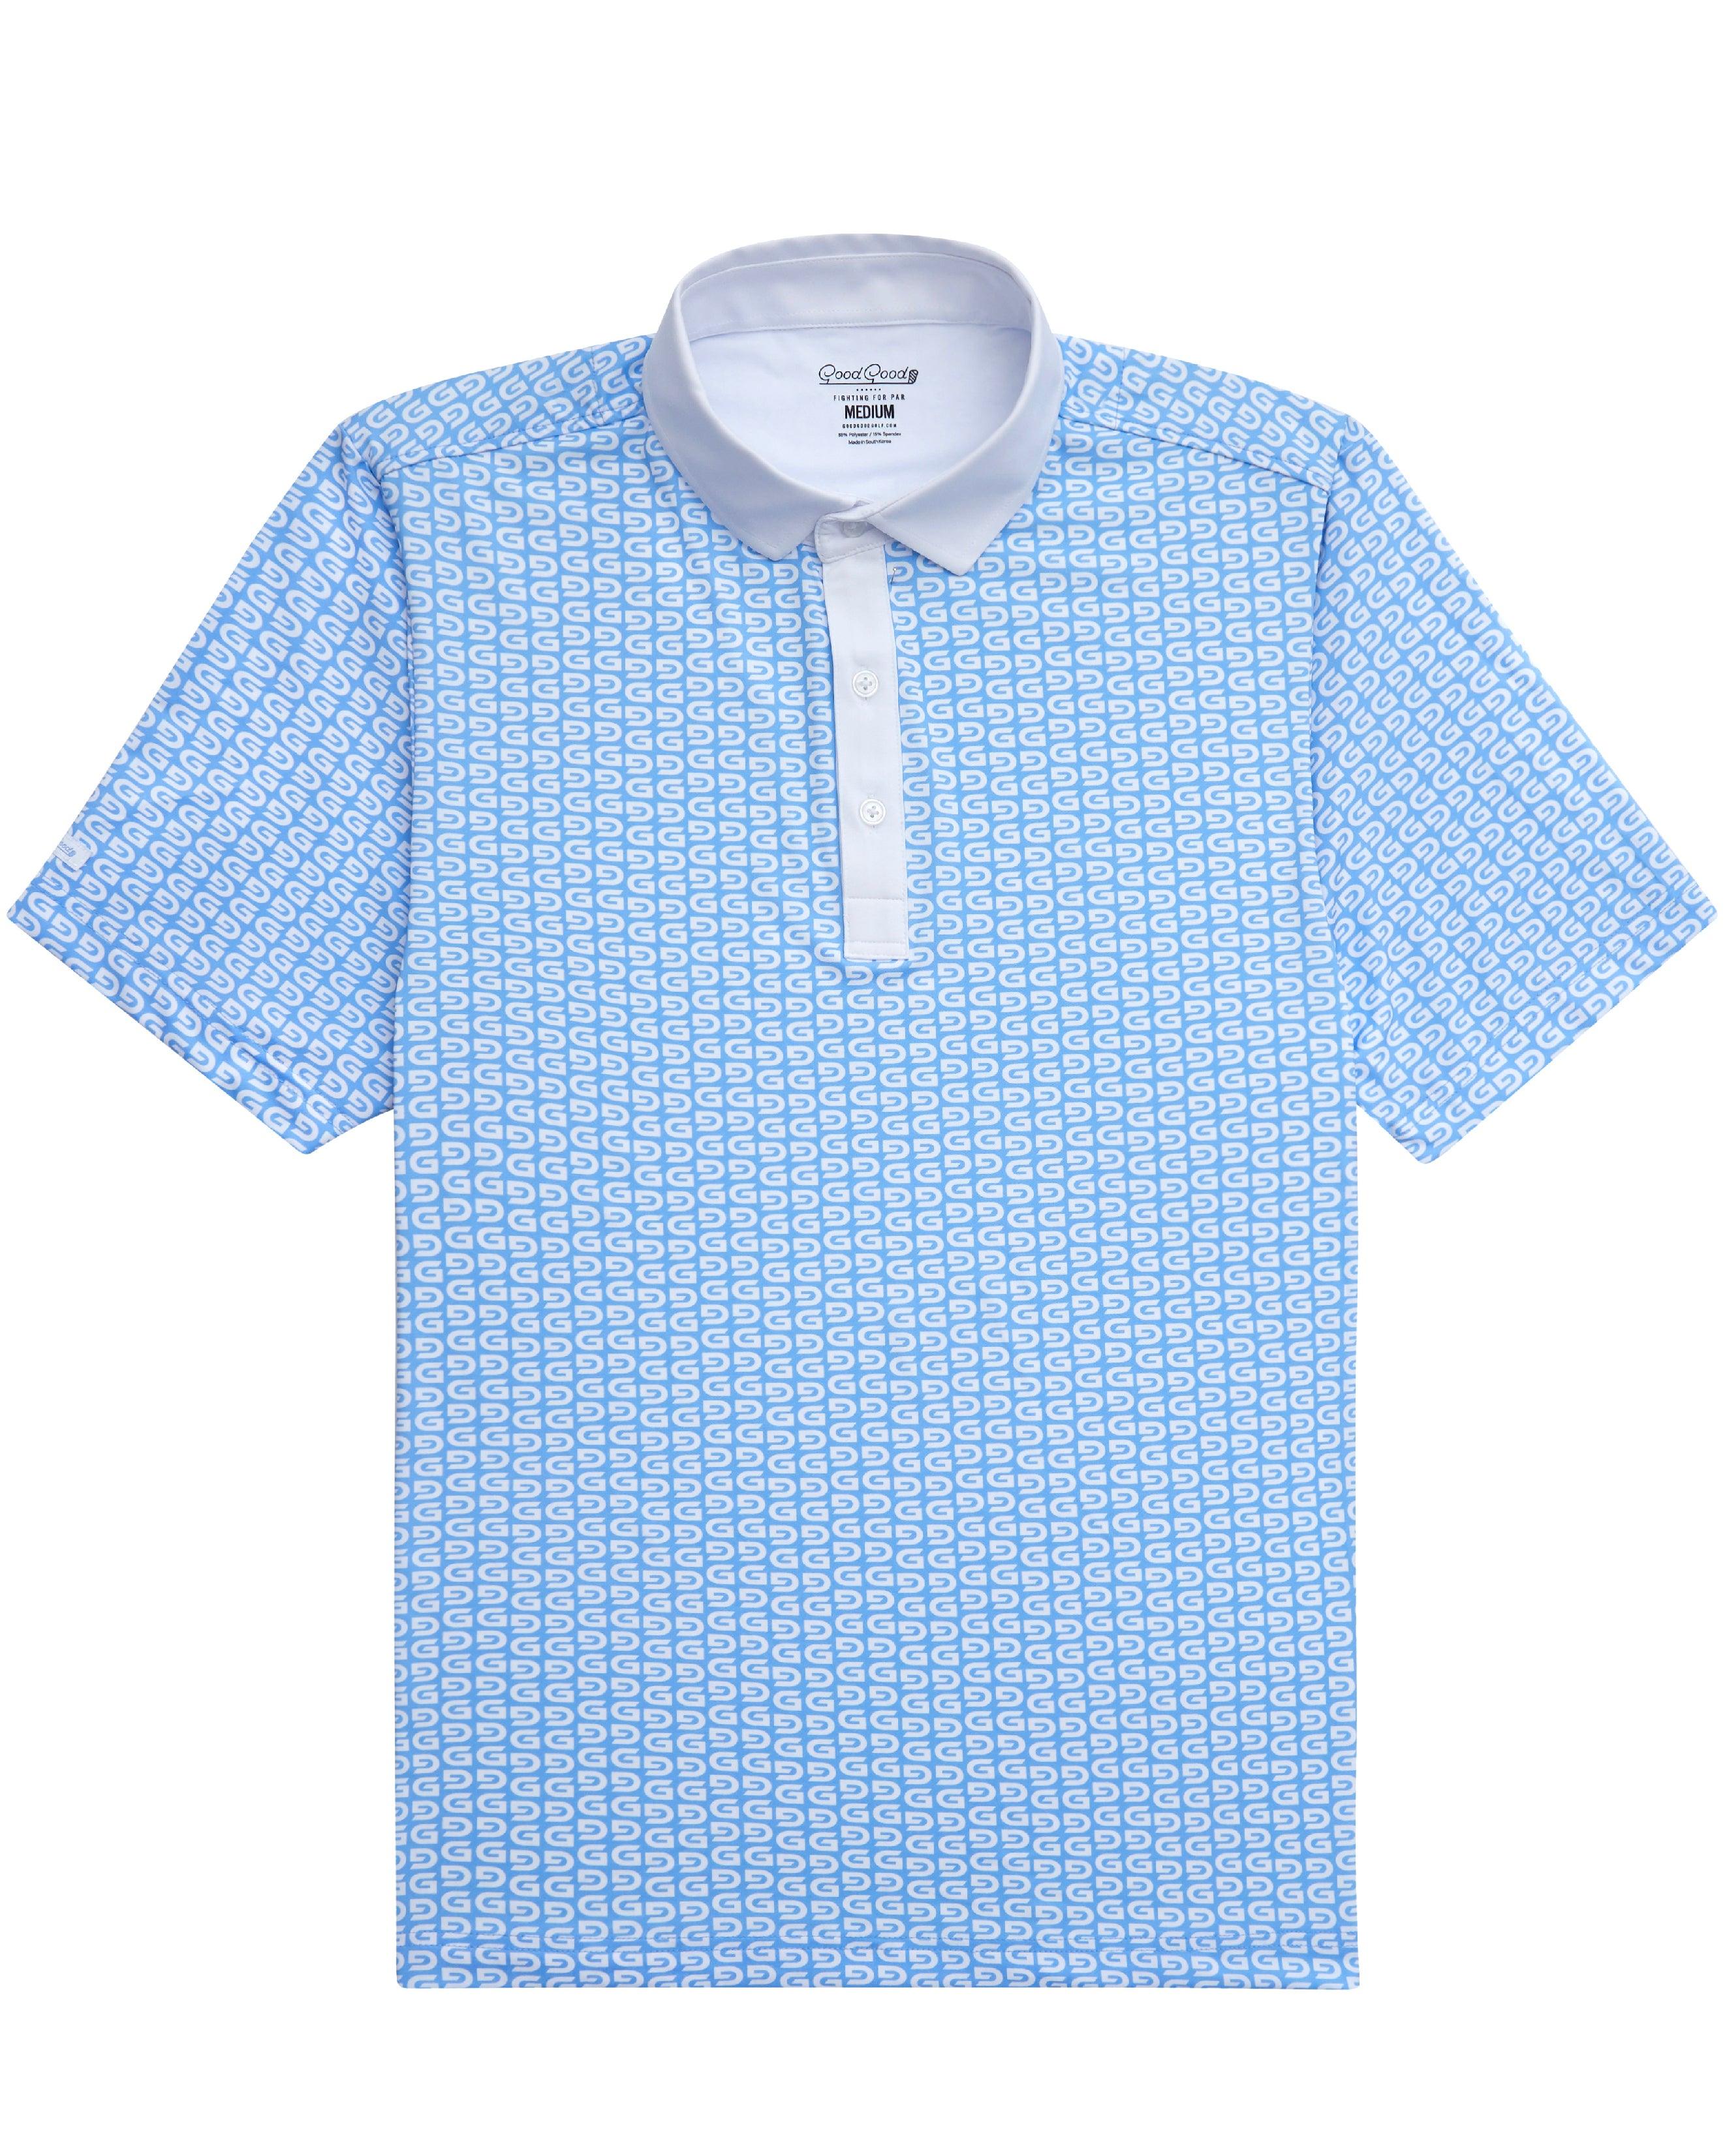 The Goodest Polo - Spring Performance Polo by Good Good